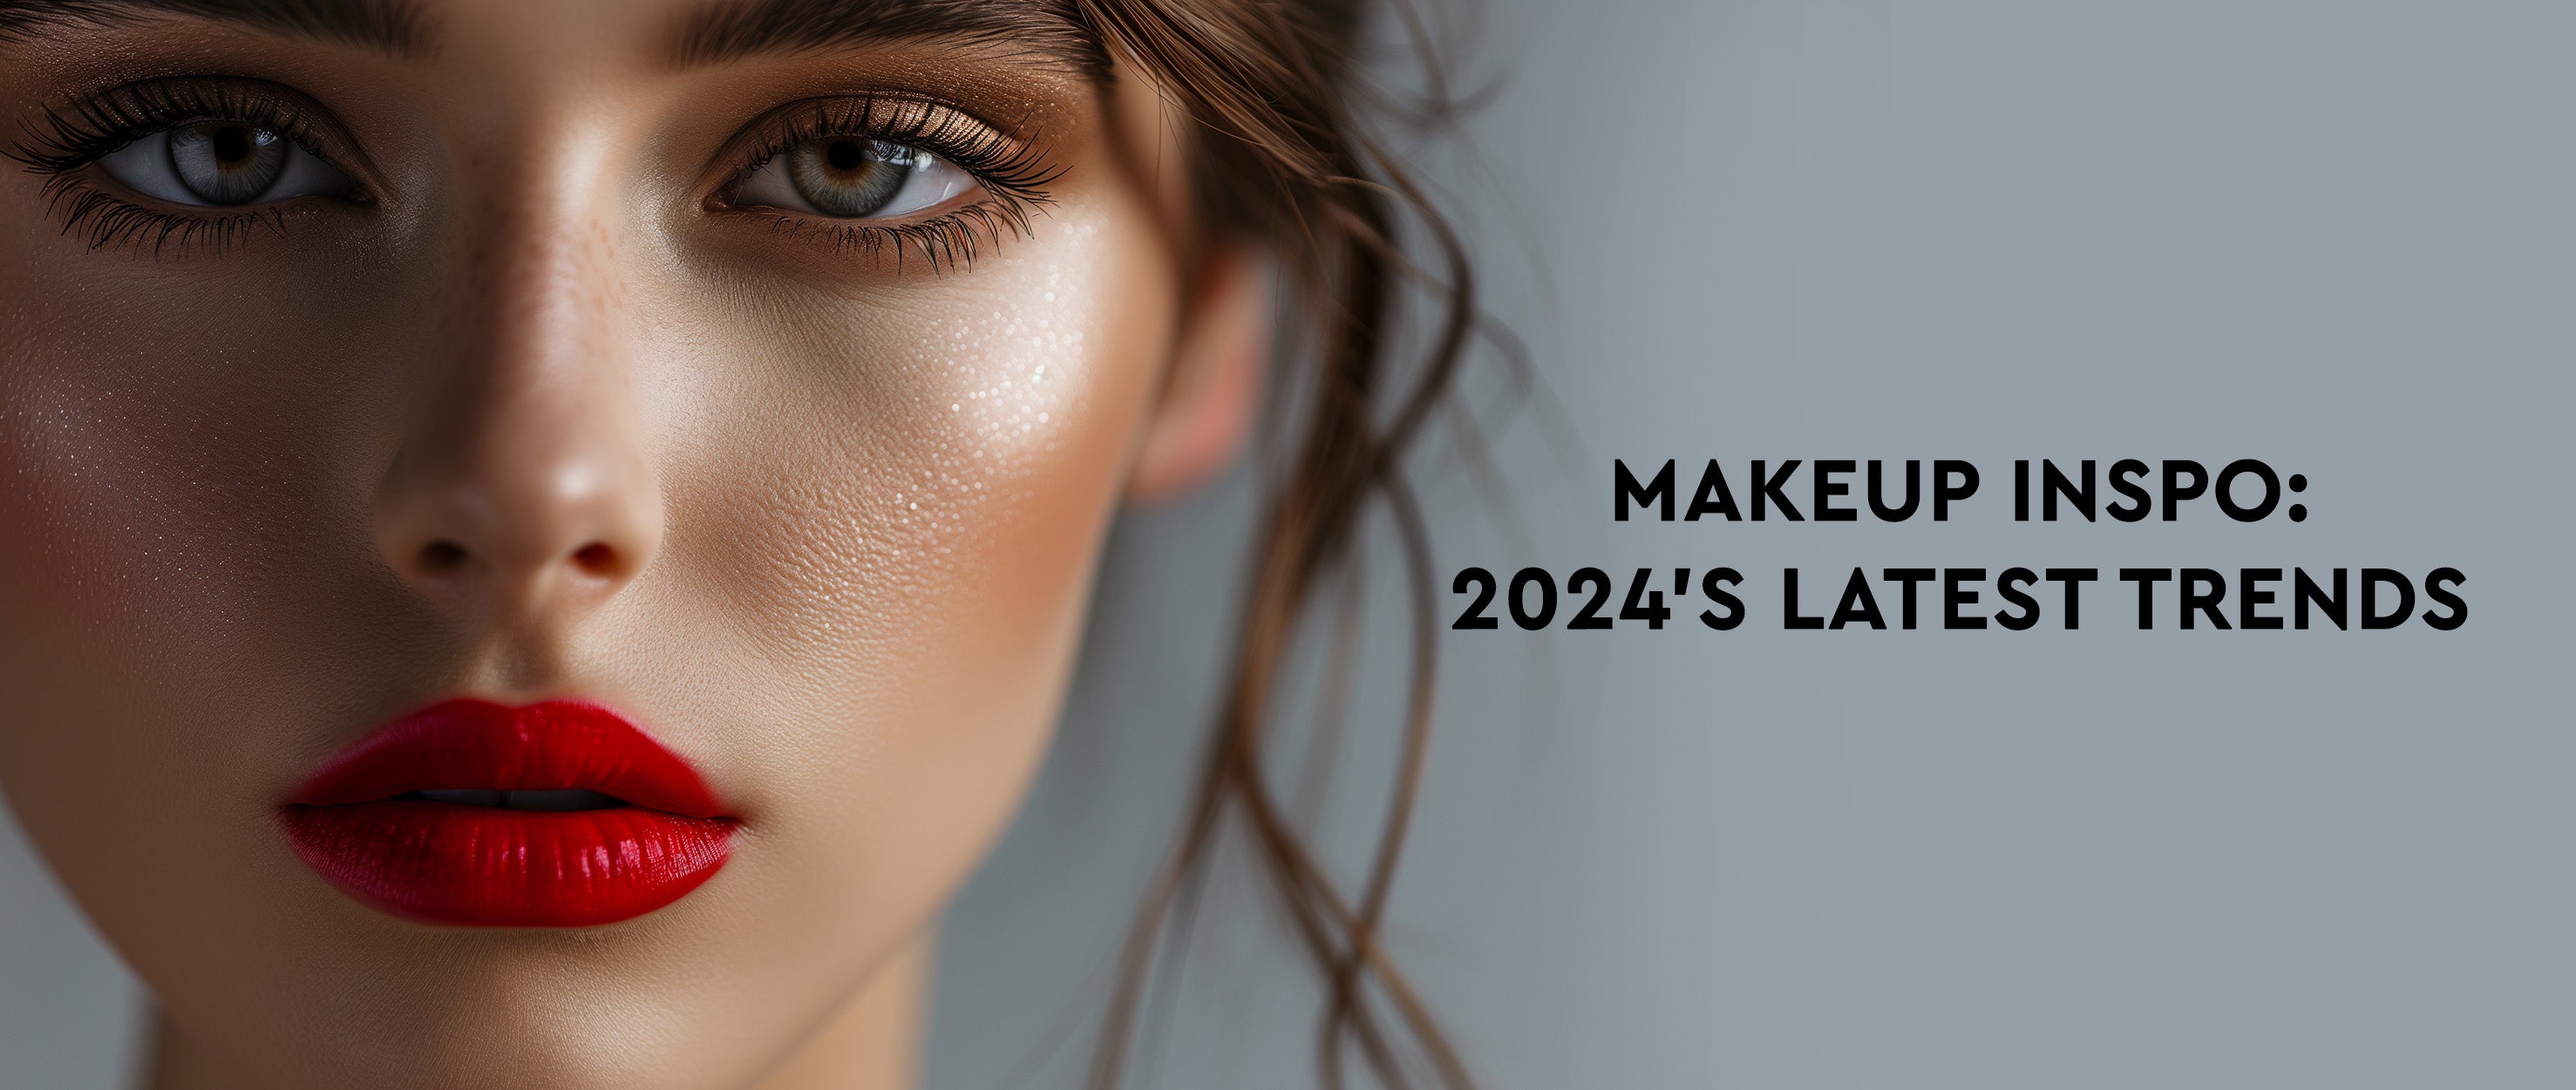 From Office Siren to Espresso Makeup—2024's Latest Makeup Trends